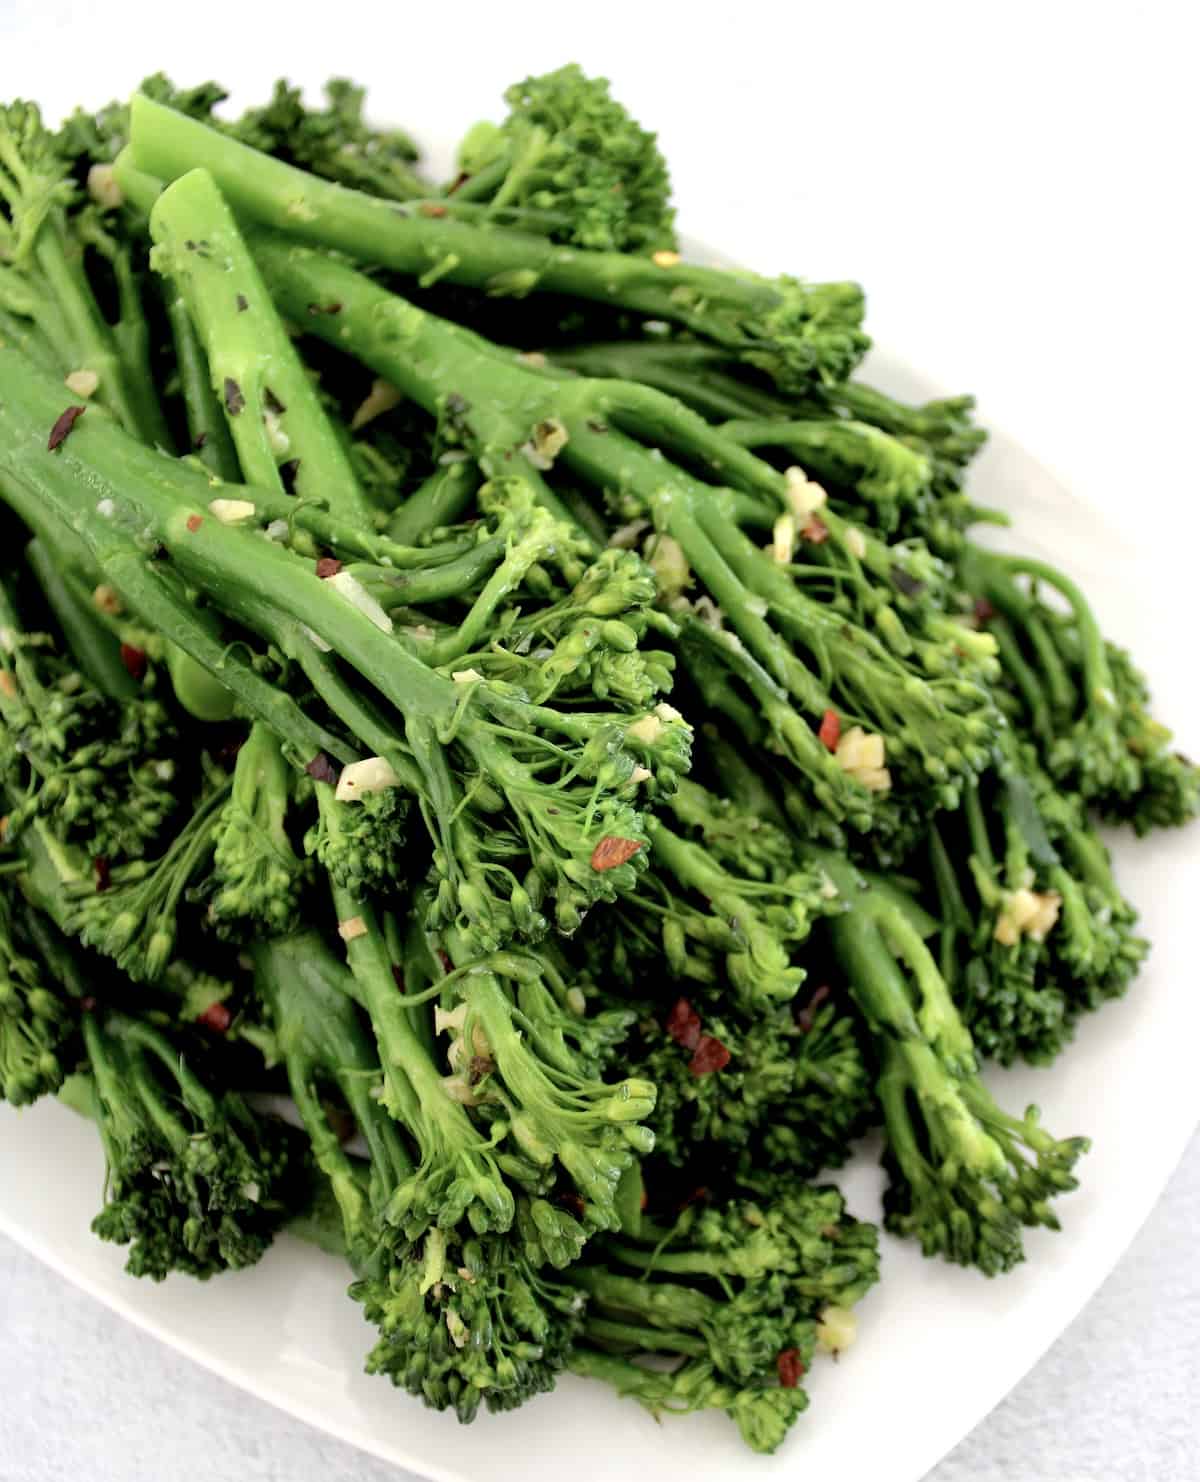 Sautéed Broccolini with Garlic on white plate with red pepper flakes